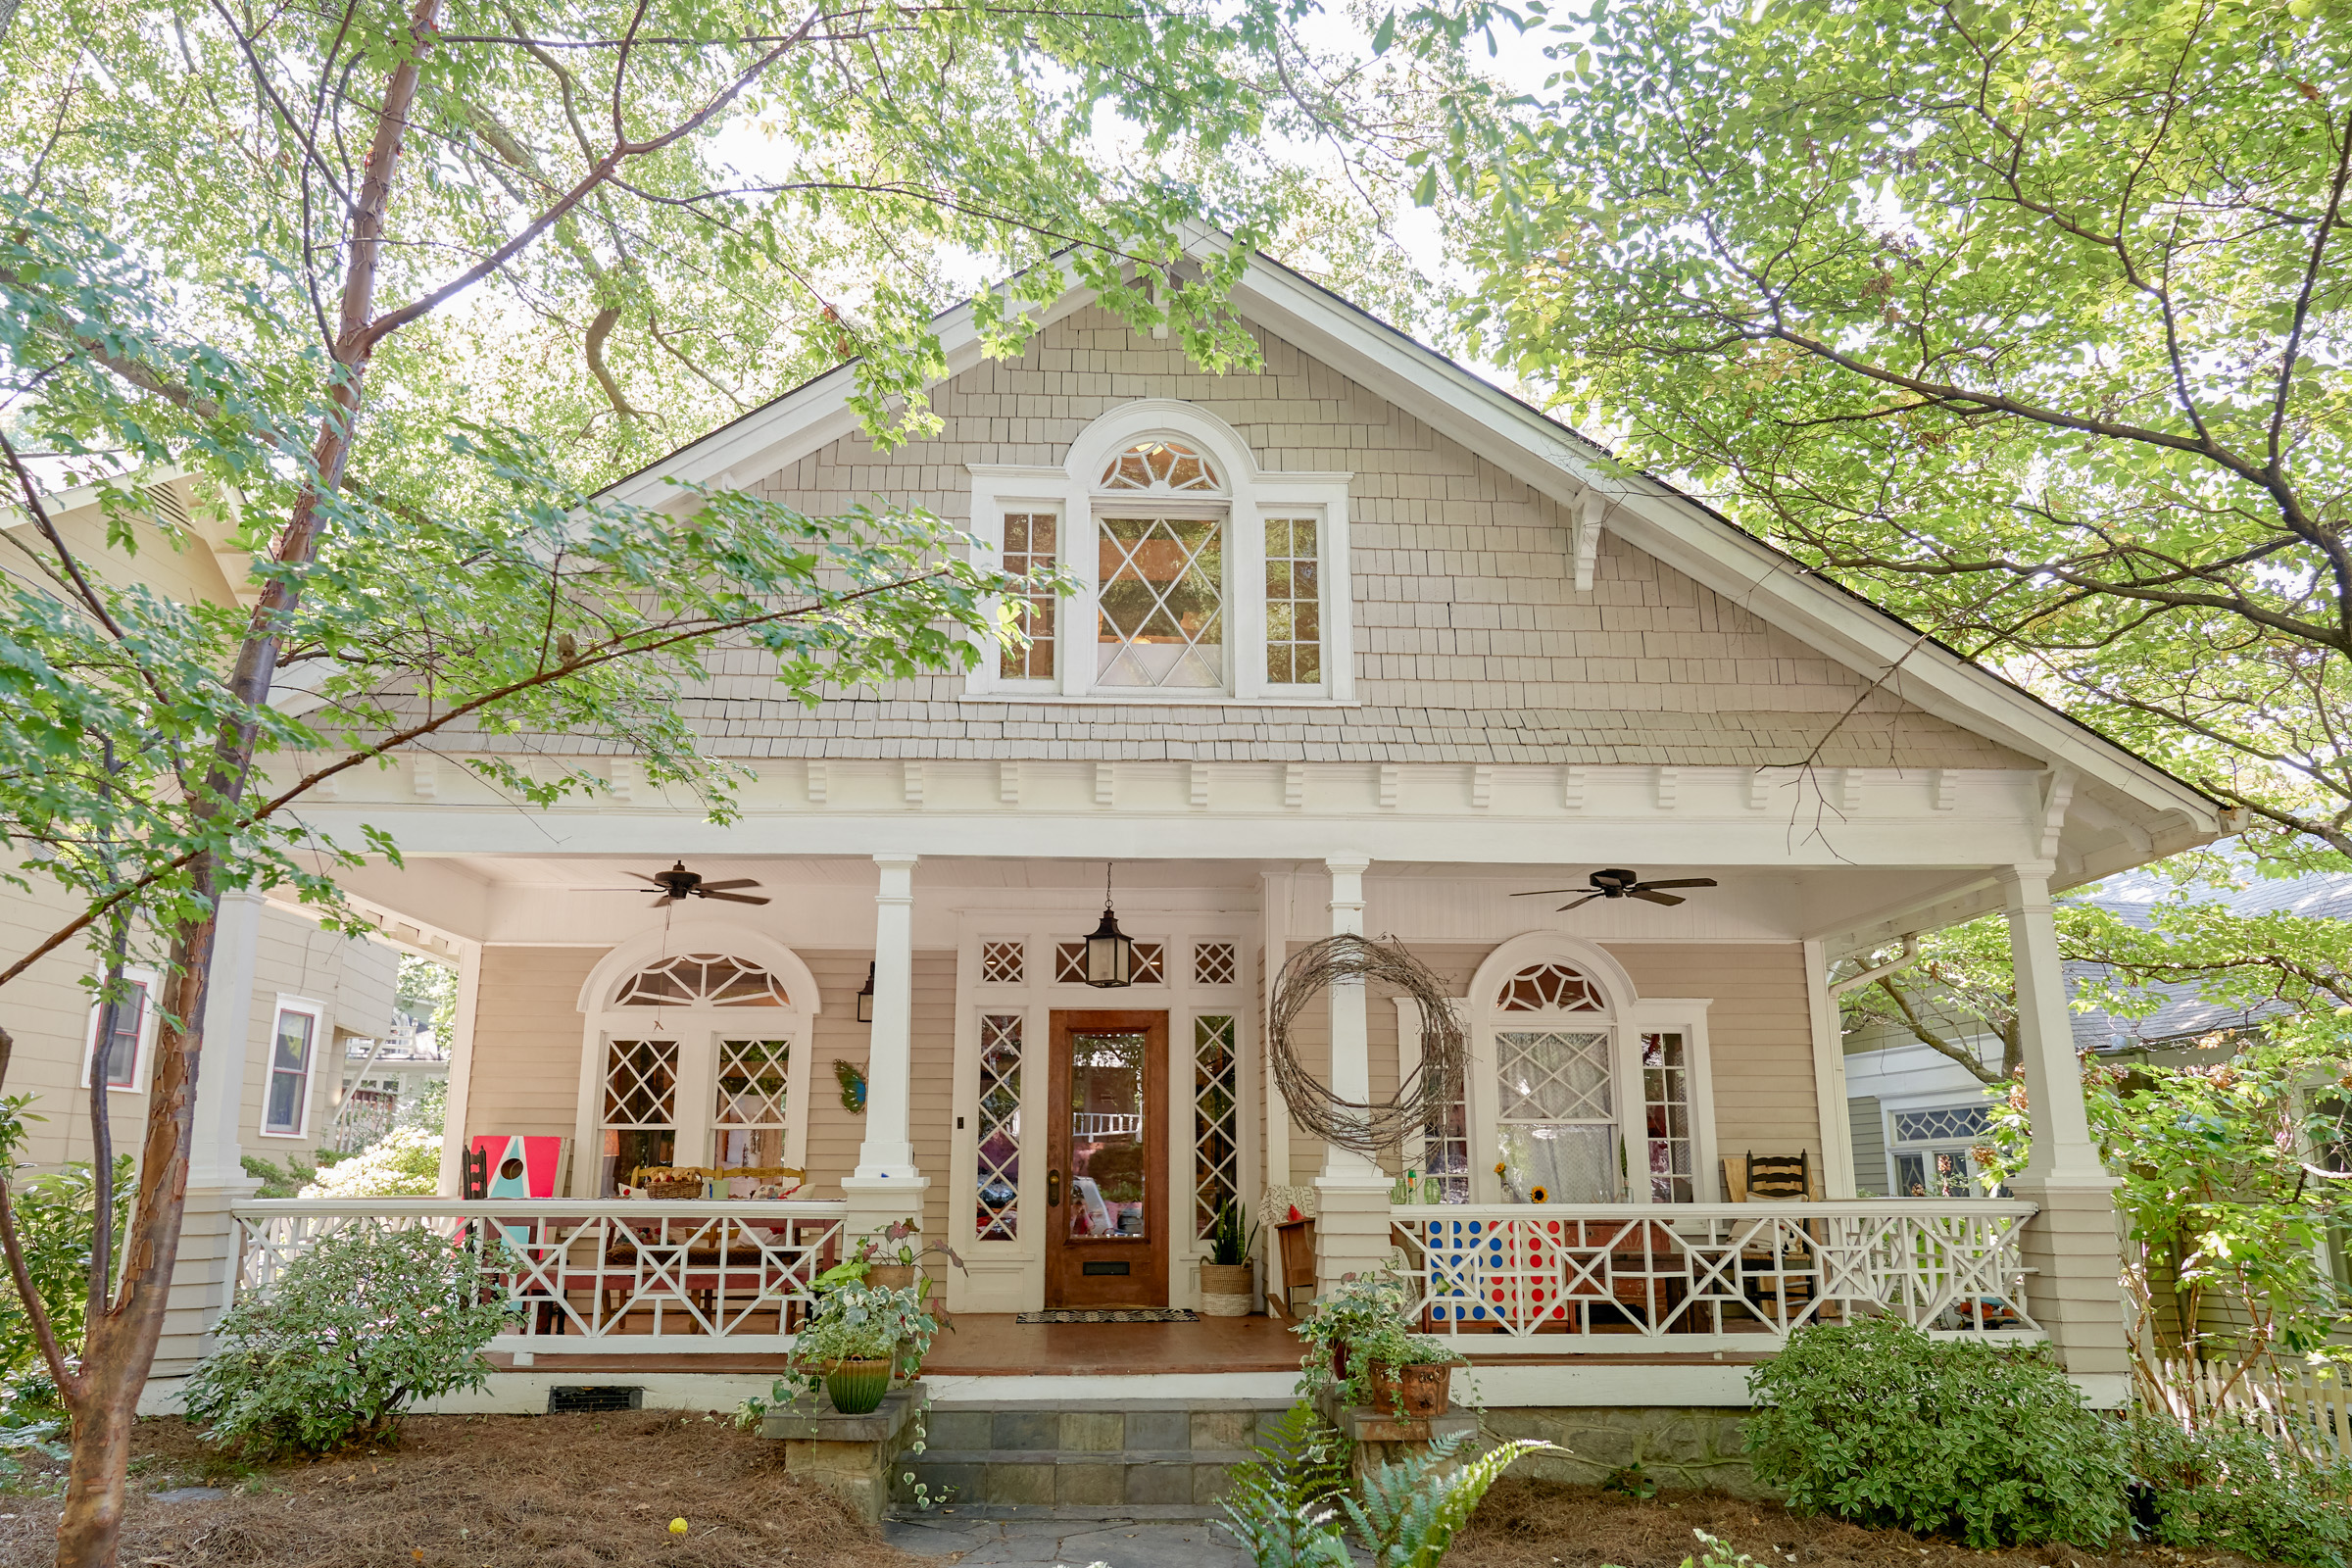 Charming white house with a front porch surrounded by green trees.